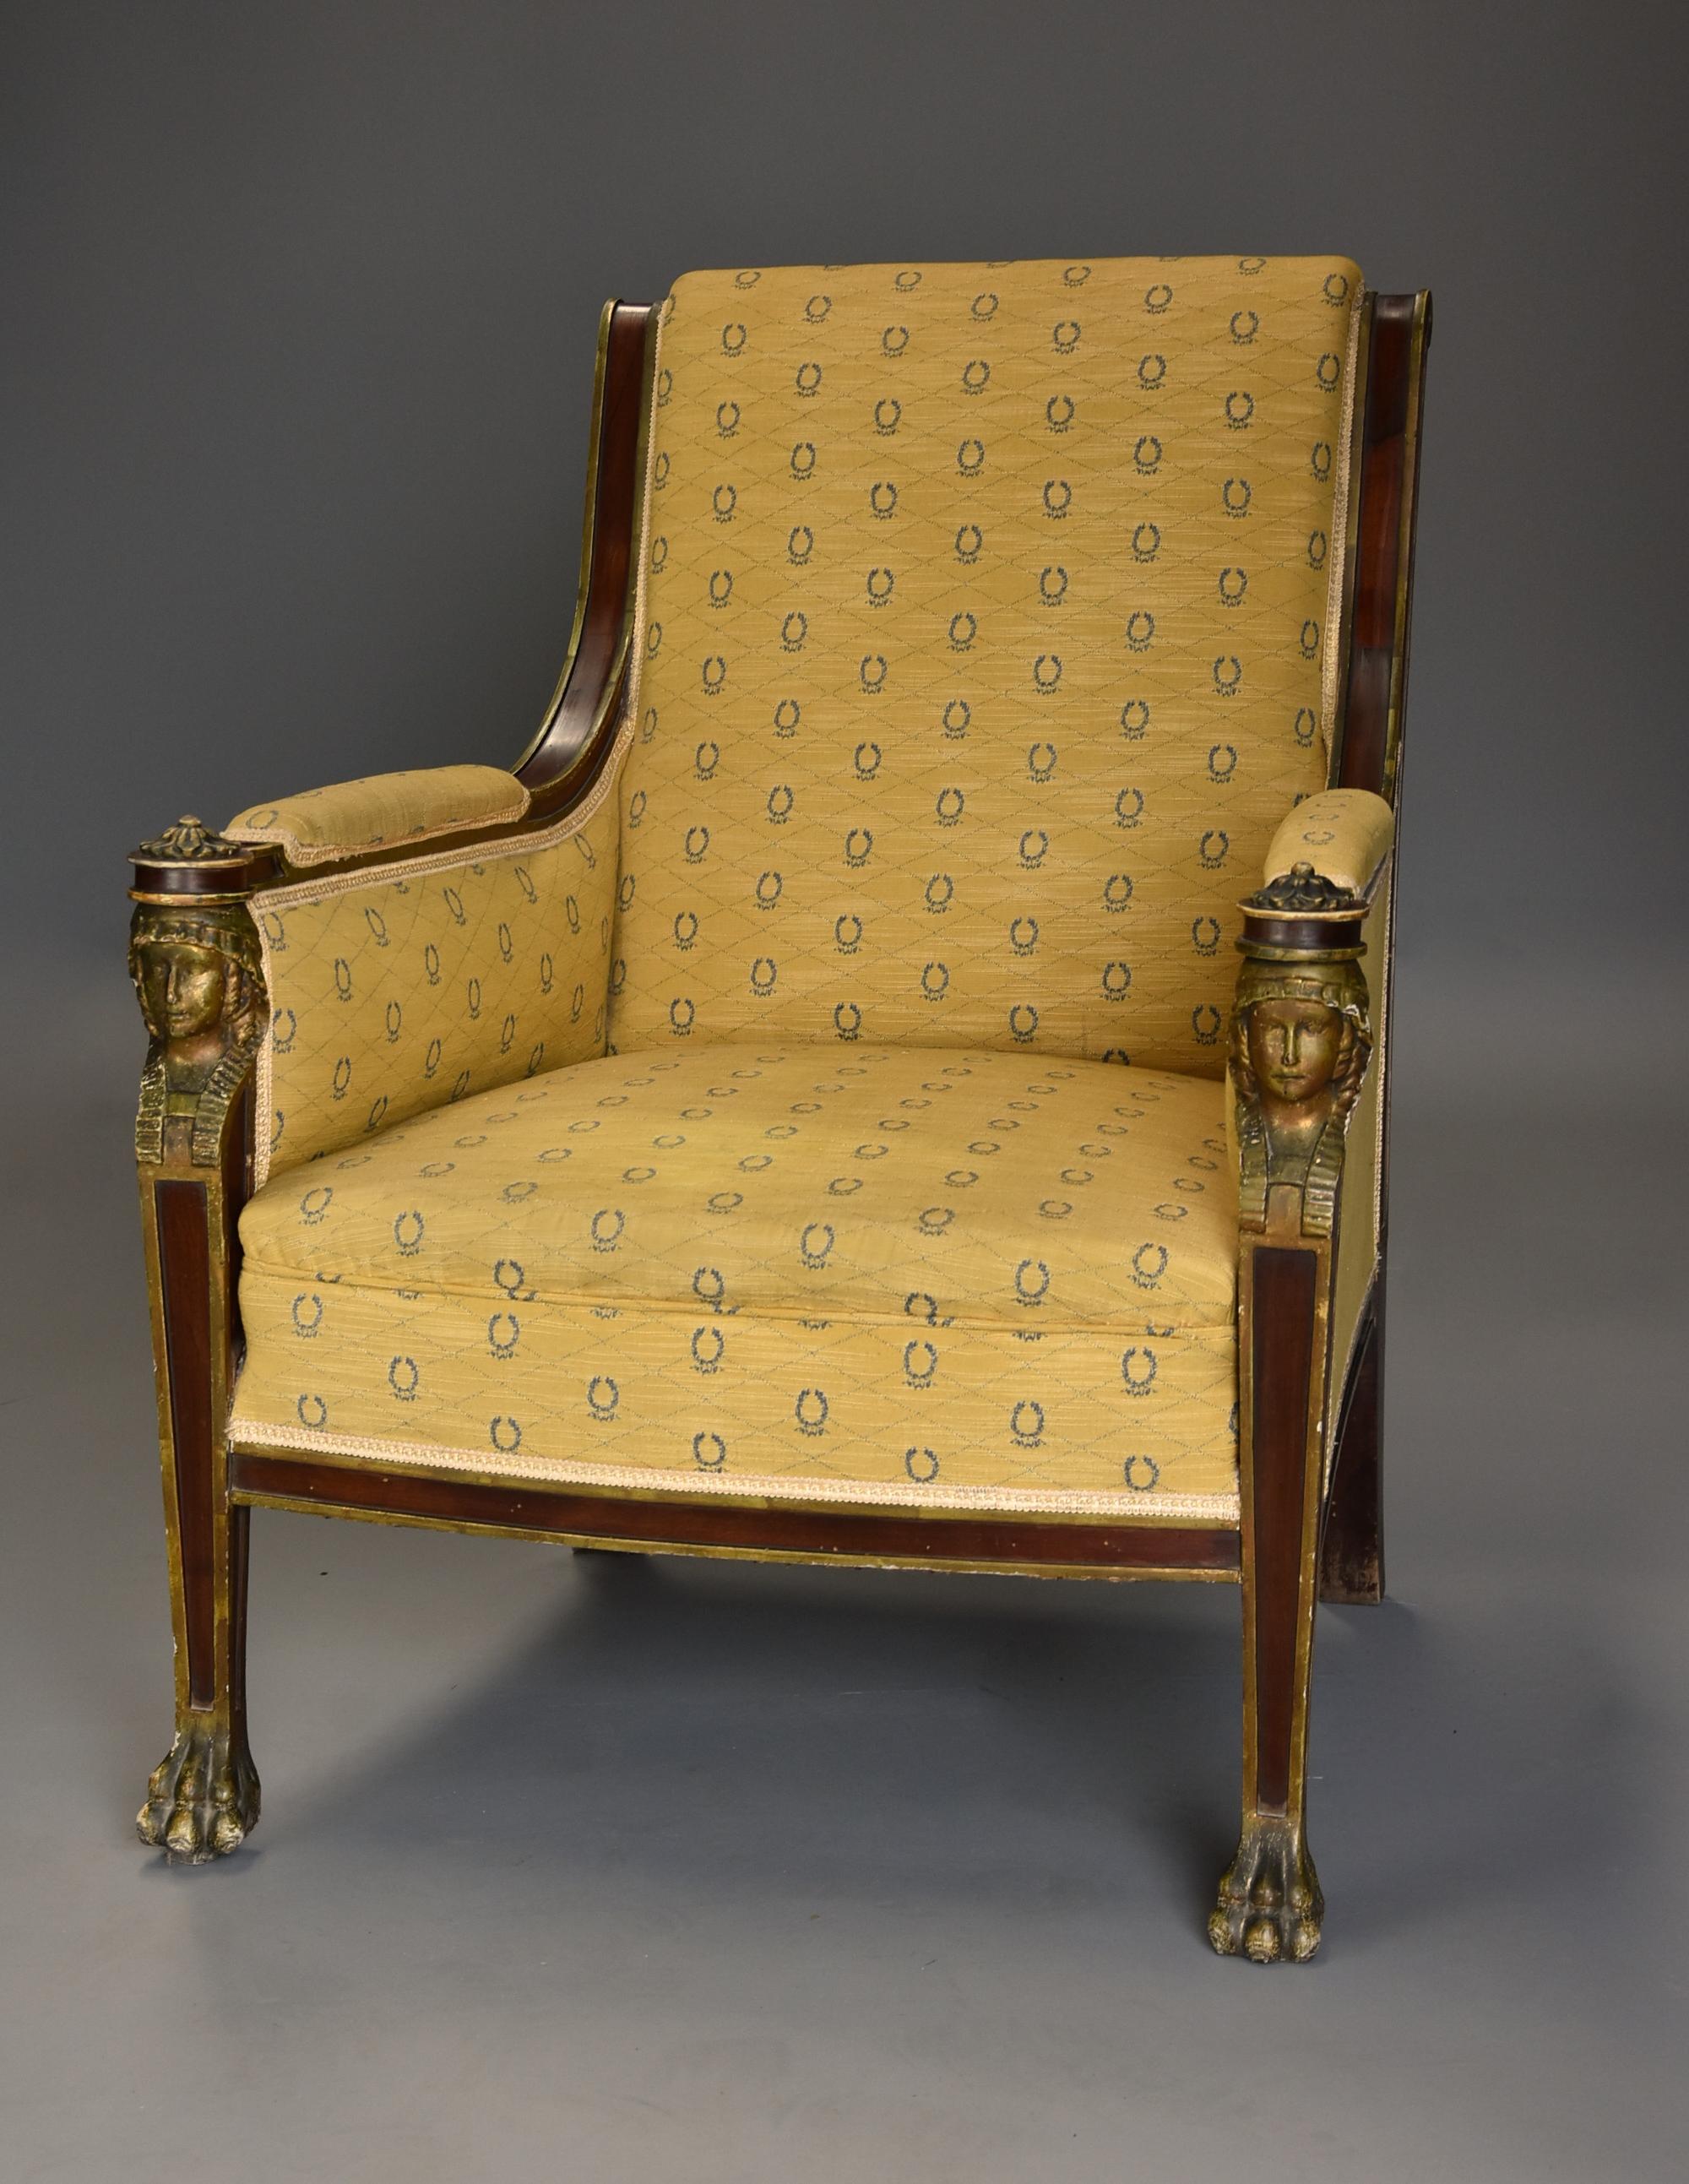 Highly Decorative Early 20th Century French Empire Style Mahogany Armchair In Fair Condition For Sale In Suffolk, GB